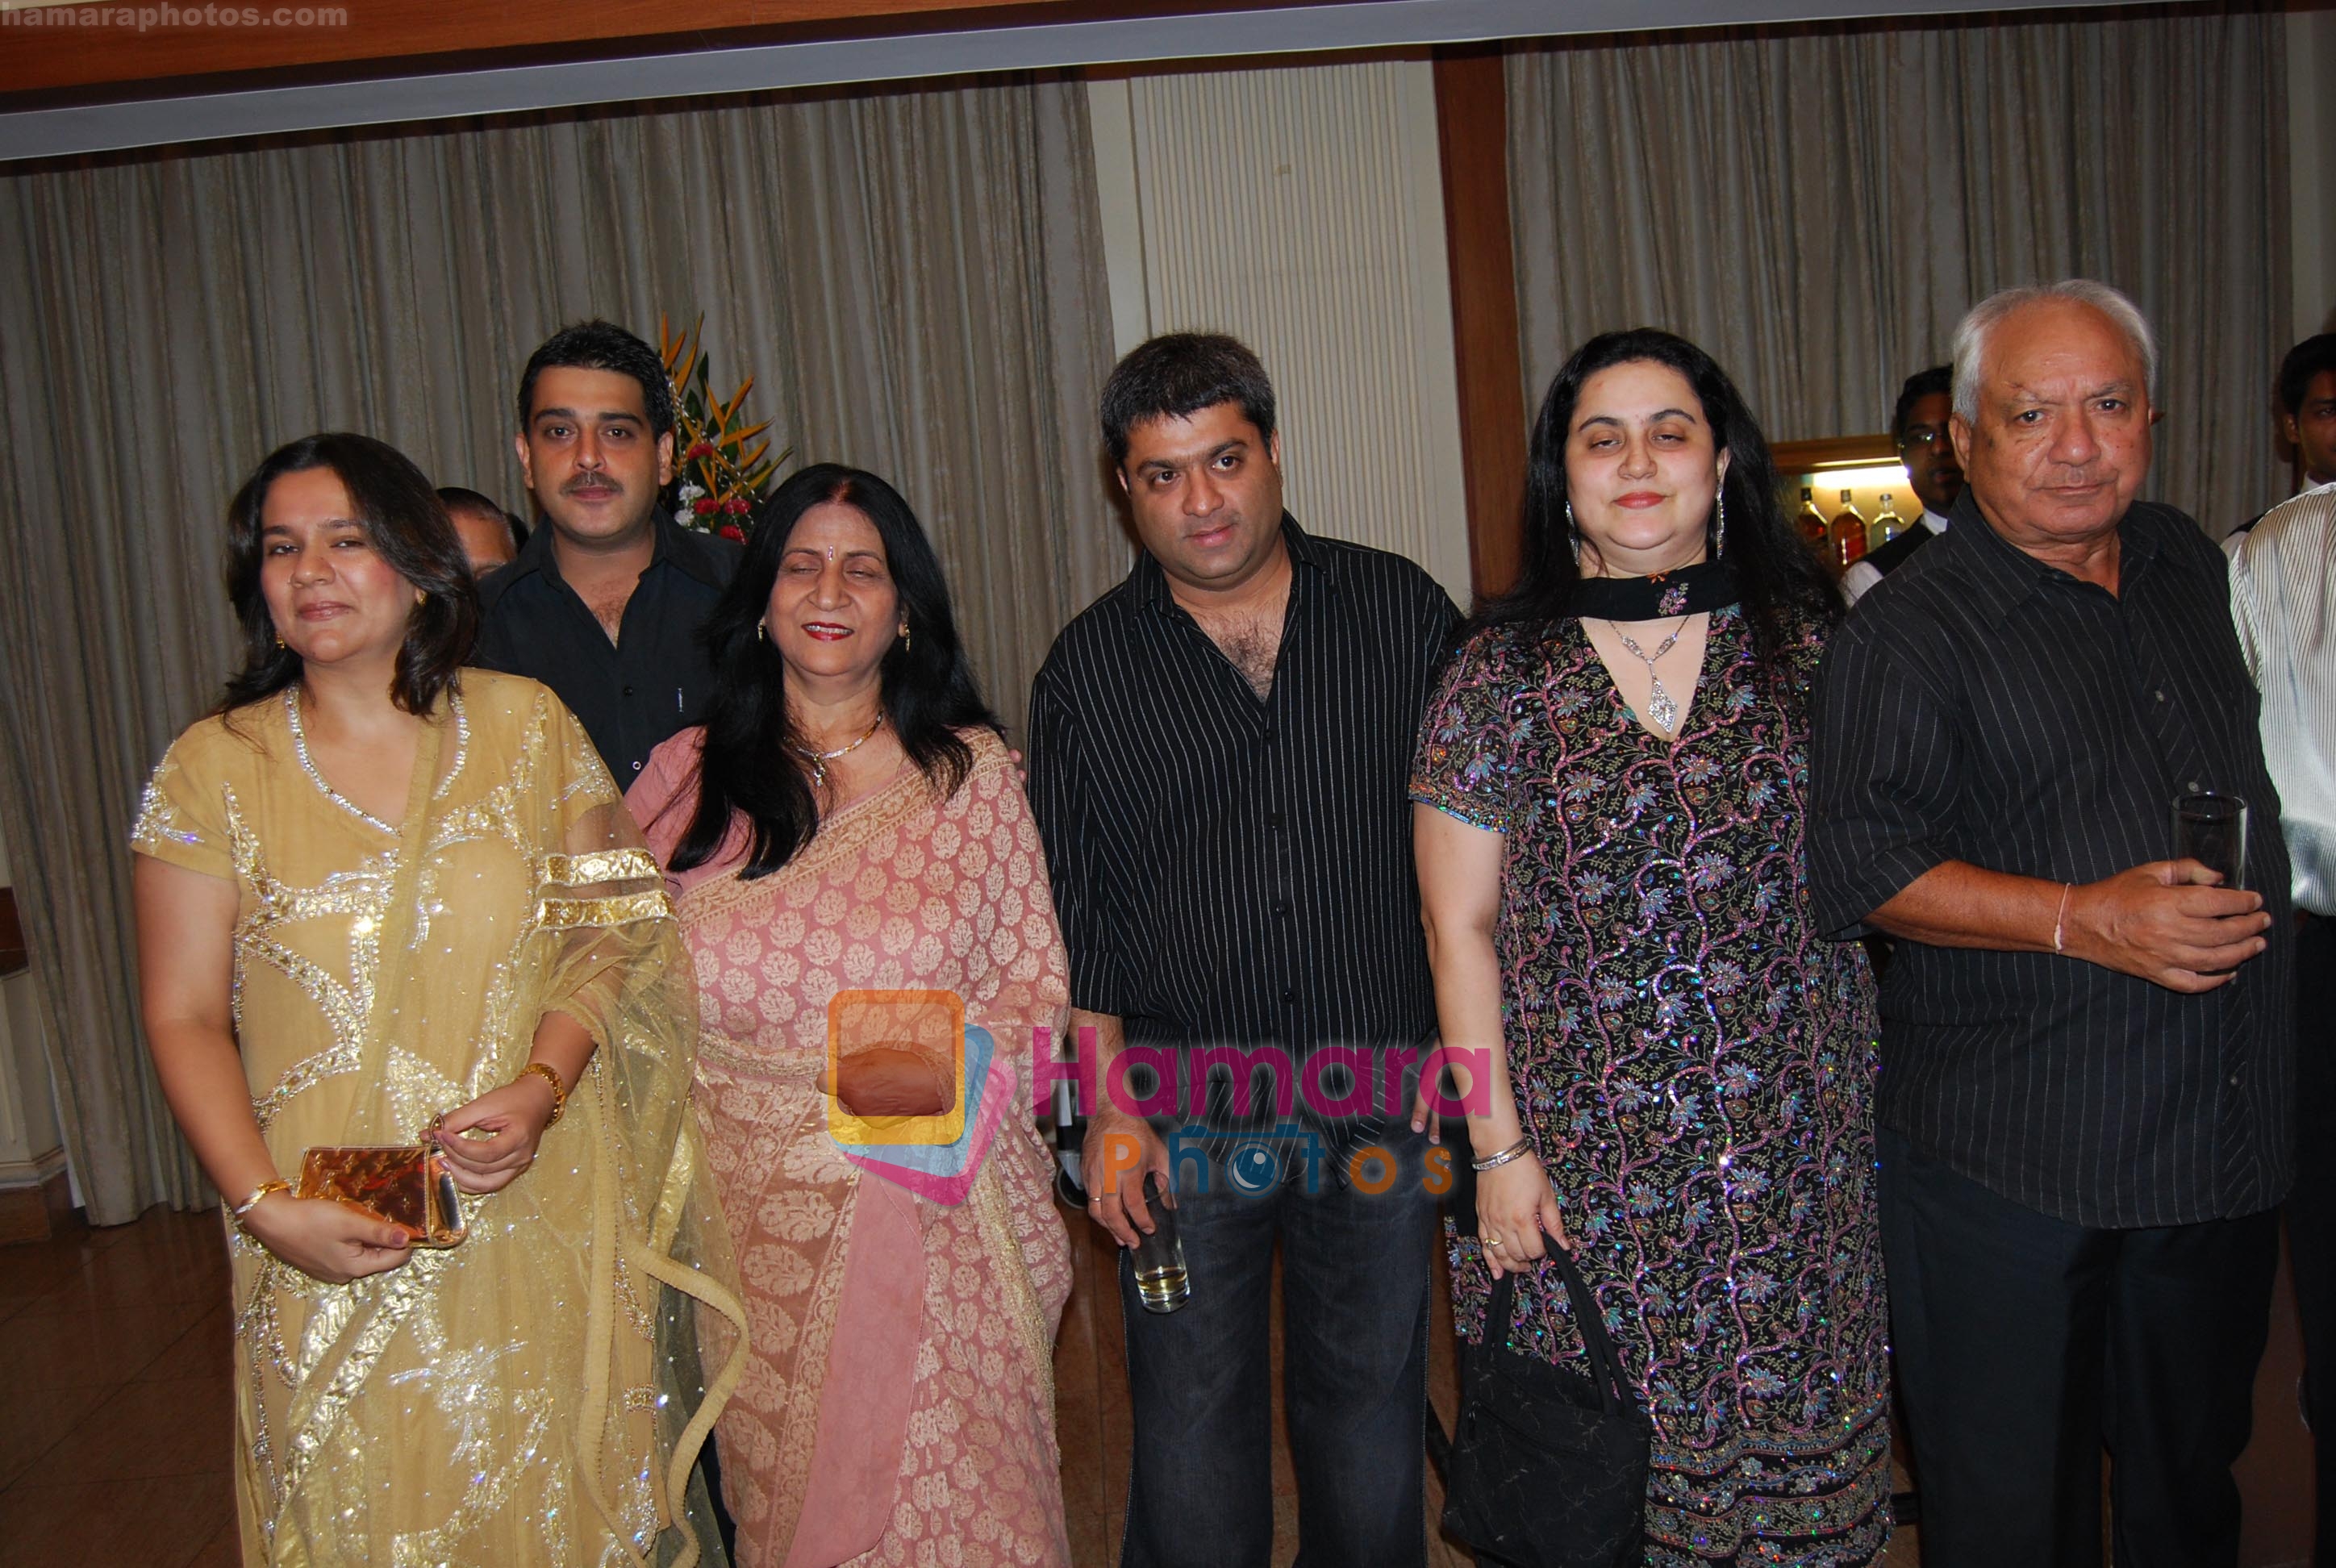 Mohan Kumar with Family at birthday celebration party of Mohan Kumar turning 75 years